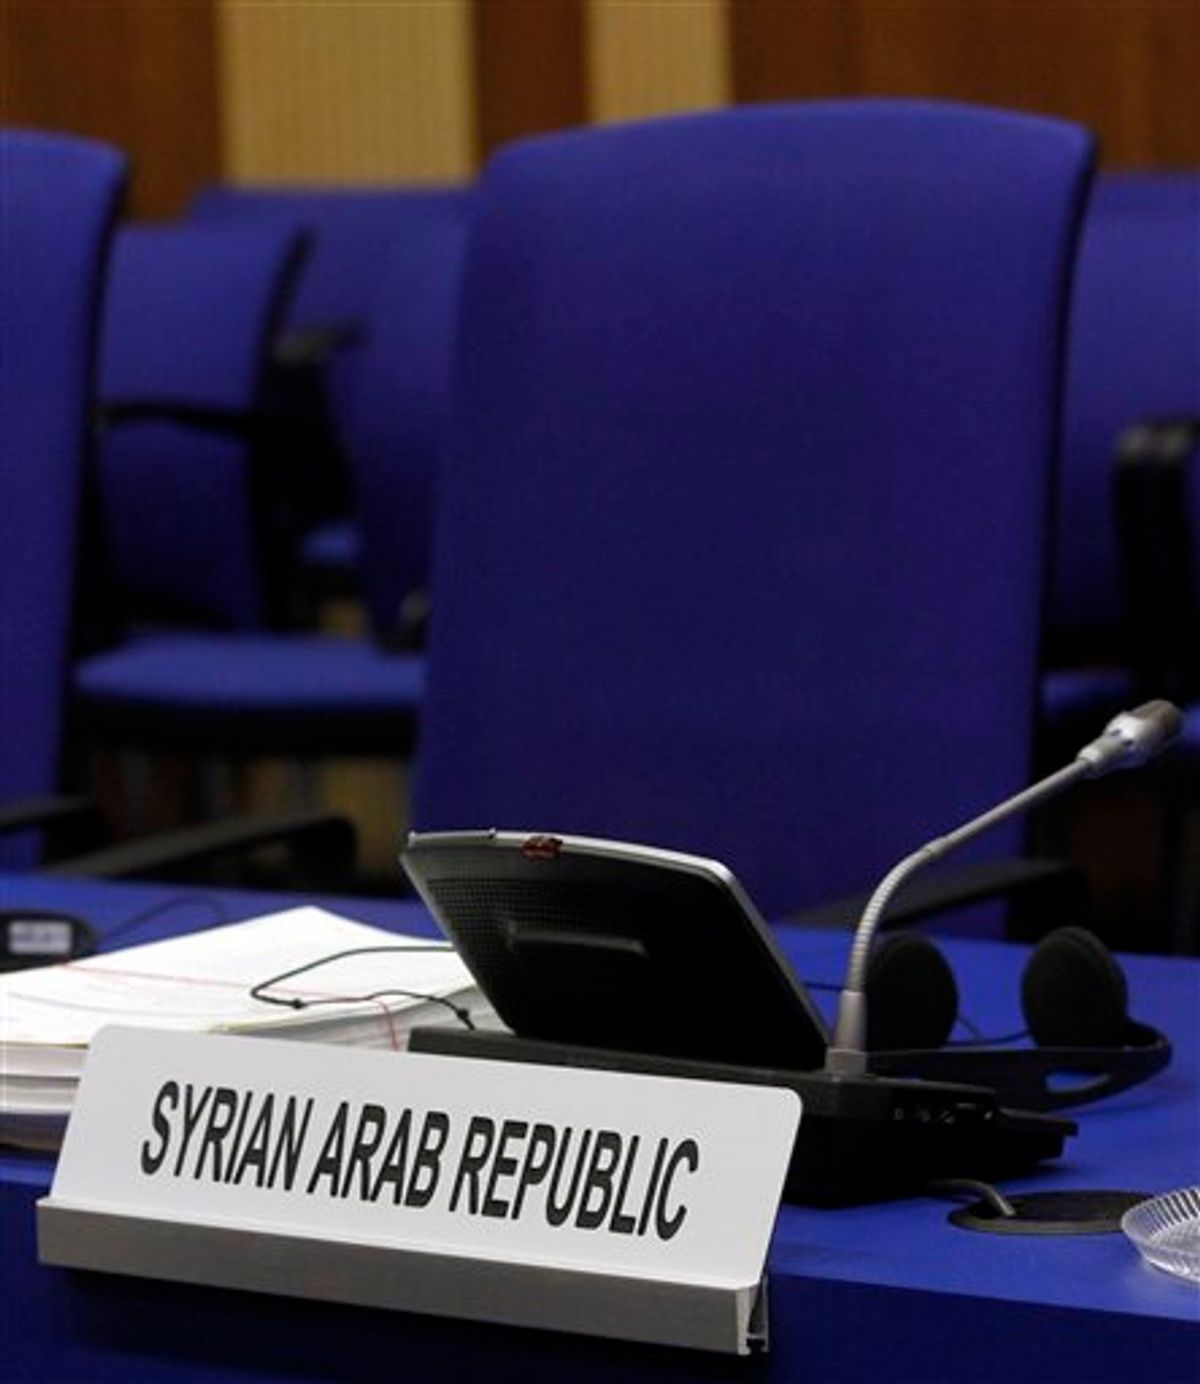 The empty chair of Syria's ambassador to Austria Bassam al-Sabbagh at the start of International Atomic Energy Agency, IAEA's board of governors meeting at the International Center, in Vienna, Austria, on Wednesday, June 8, 2011. (AP Photo/Ronald Zak) (AP)